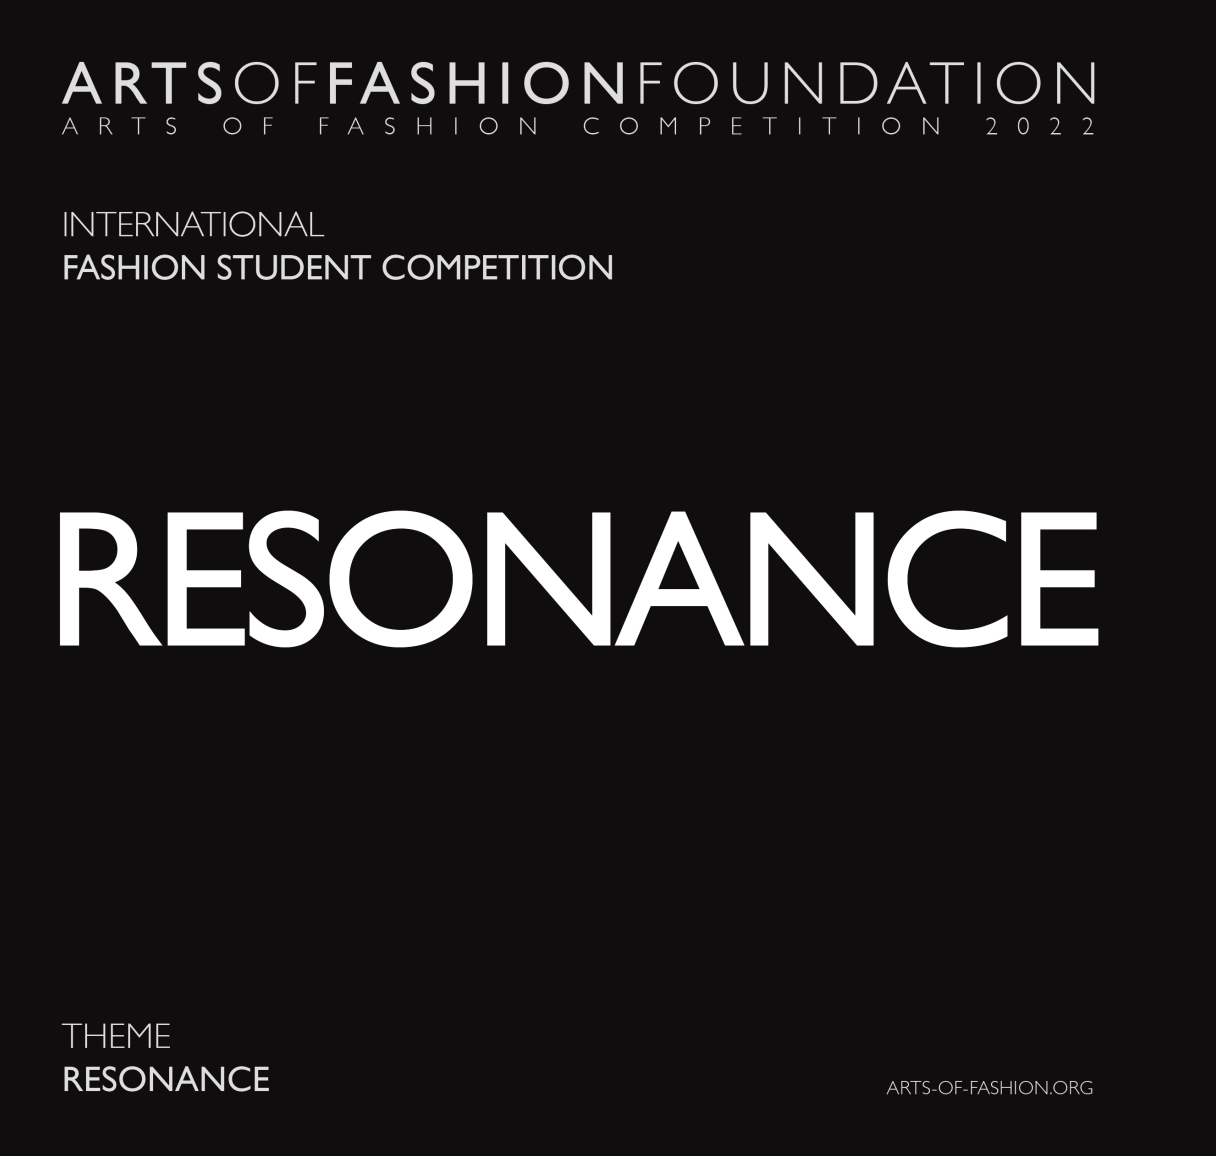 Arts of Fashion Competition 2022